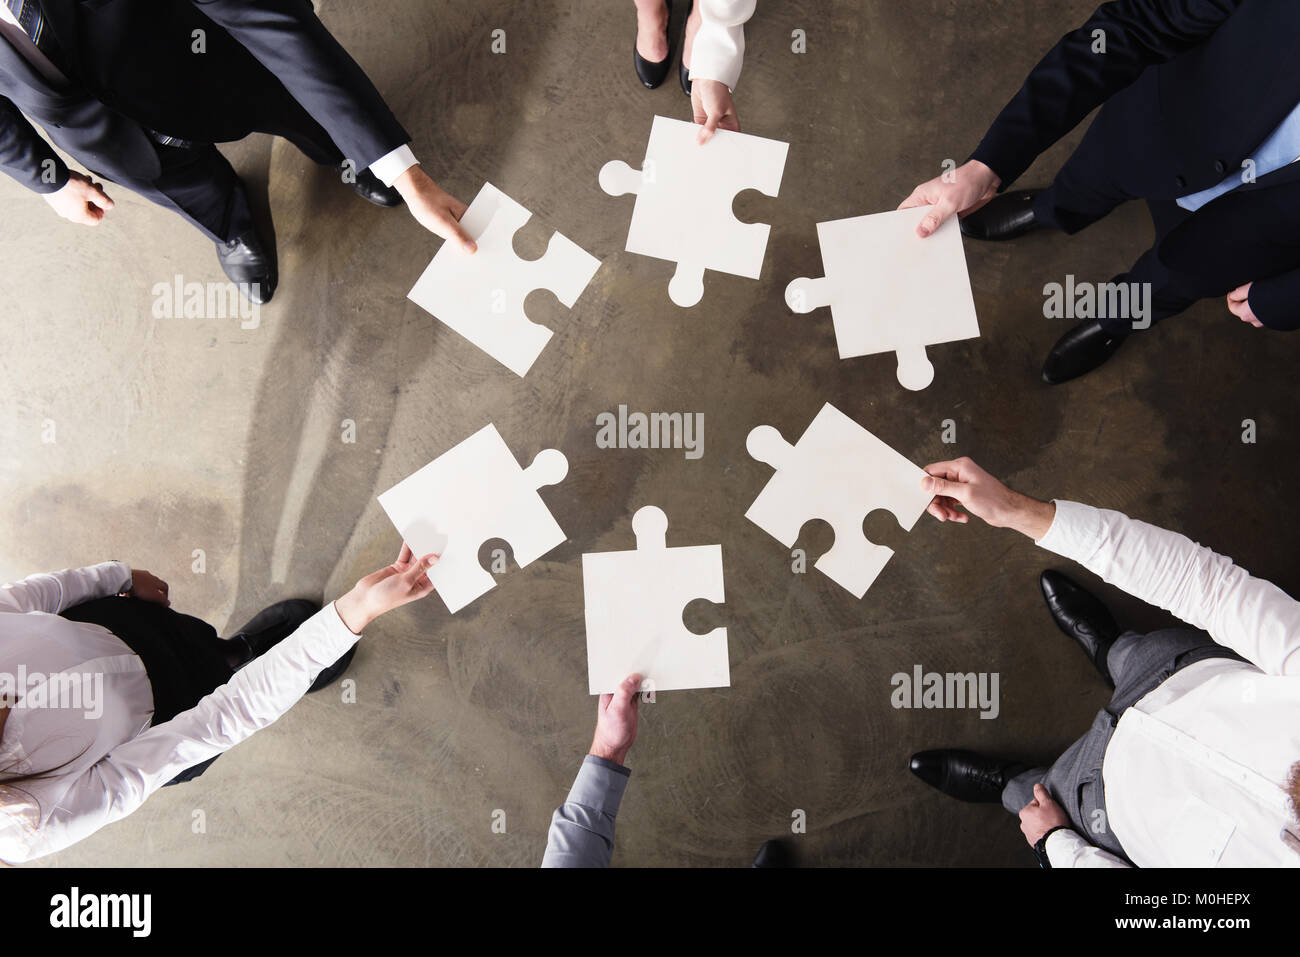 Teamwork of partners. Concept of integration and startup with puzzle pieces Stock Photo